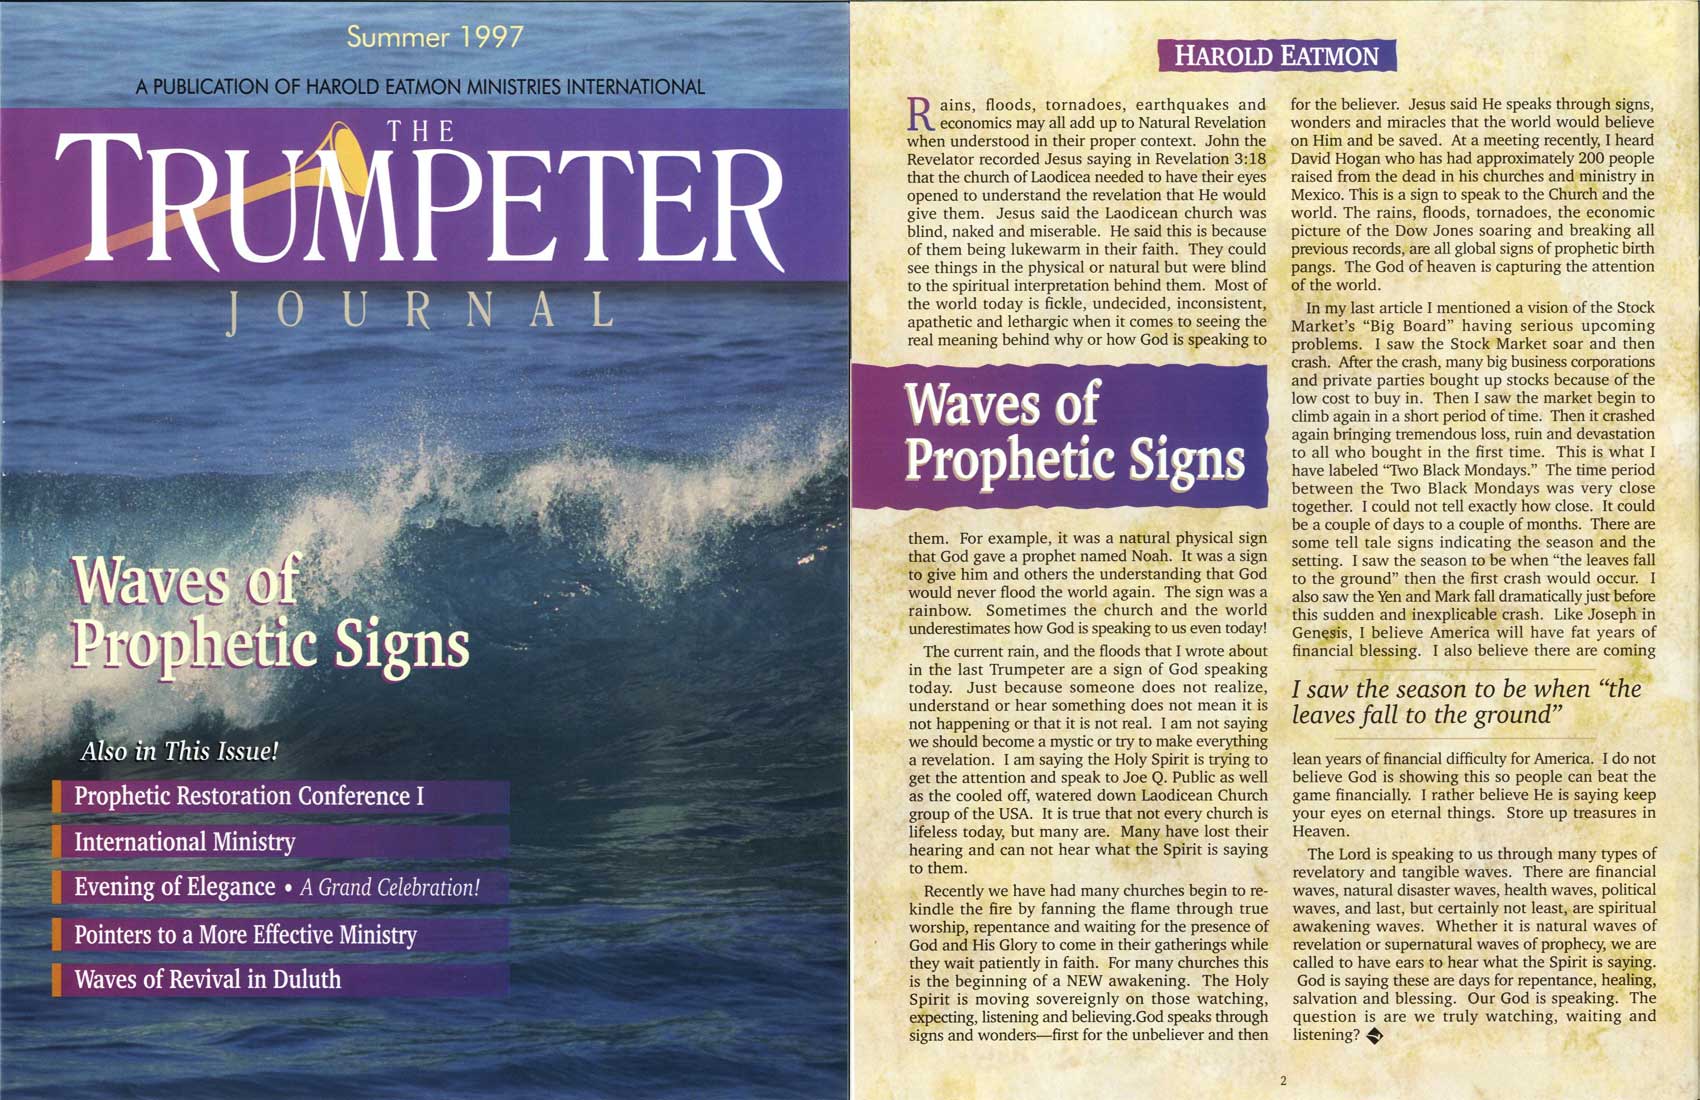 Waves of Prophetic Signs